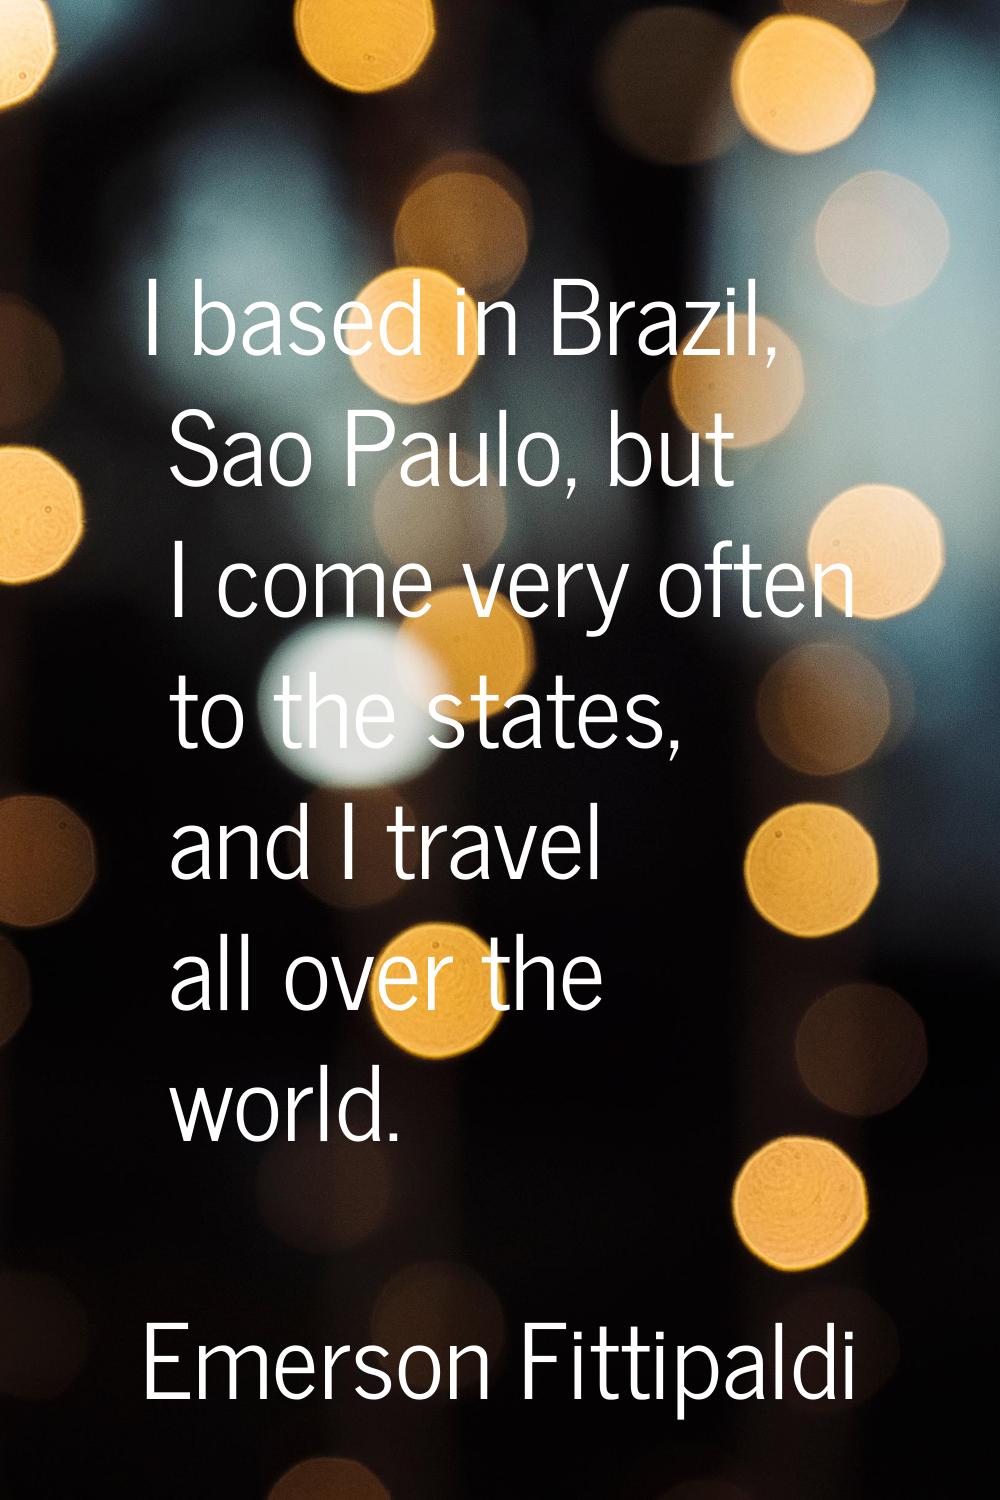 I based in Brazil, Sao Paulo, but I come very often to the states, and I travel all over the world.